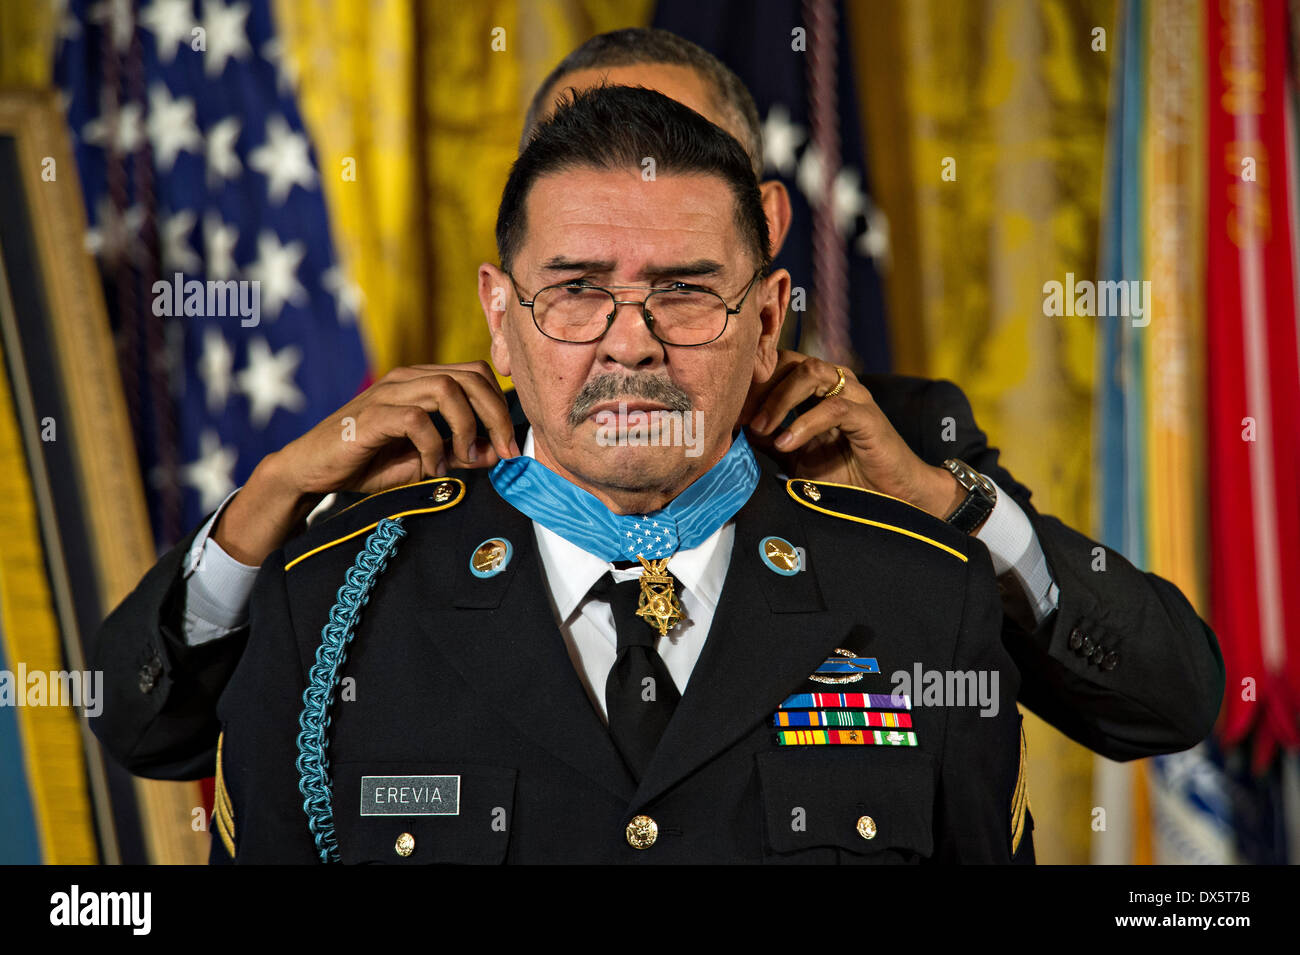 US President Barack Obama awards the Medal of Honor to Sgt. Santiago J. Erevia during a ceremony at the White House March 18, 2014 in Washington D.C. Erevia earned the Medal of Honor for his courageous actions while serving as radio telephone operator during a search and clear mission near Tam Ky, Republic of Vietnam May 21, 1969. Stock Photo